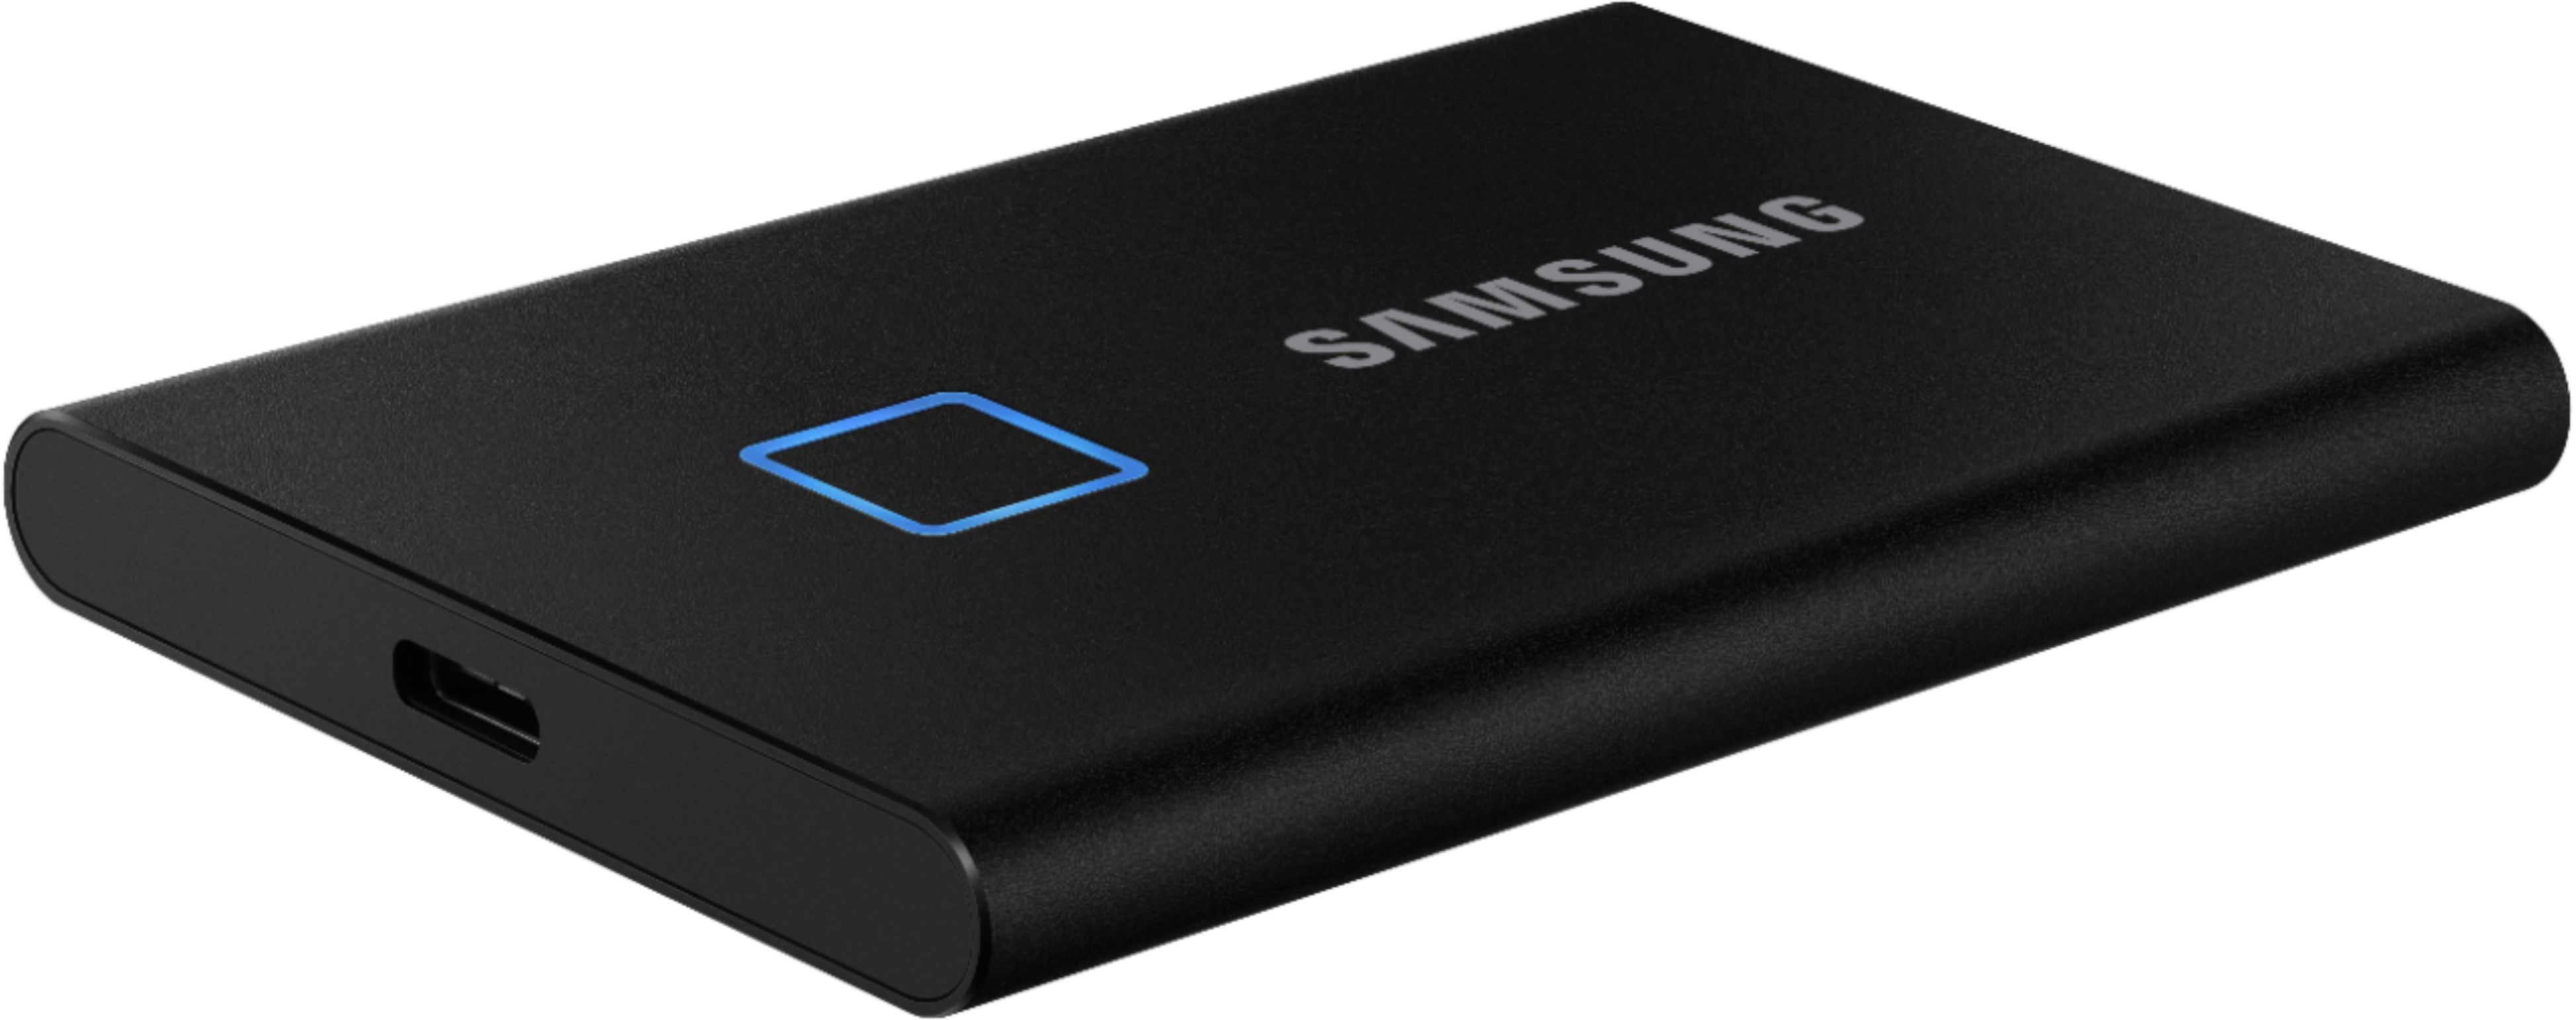 Costco DEAL - Samsung T7 SSD 2TB Touch (orig: $190; sale: $129